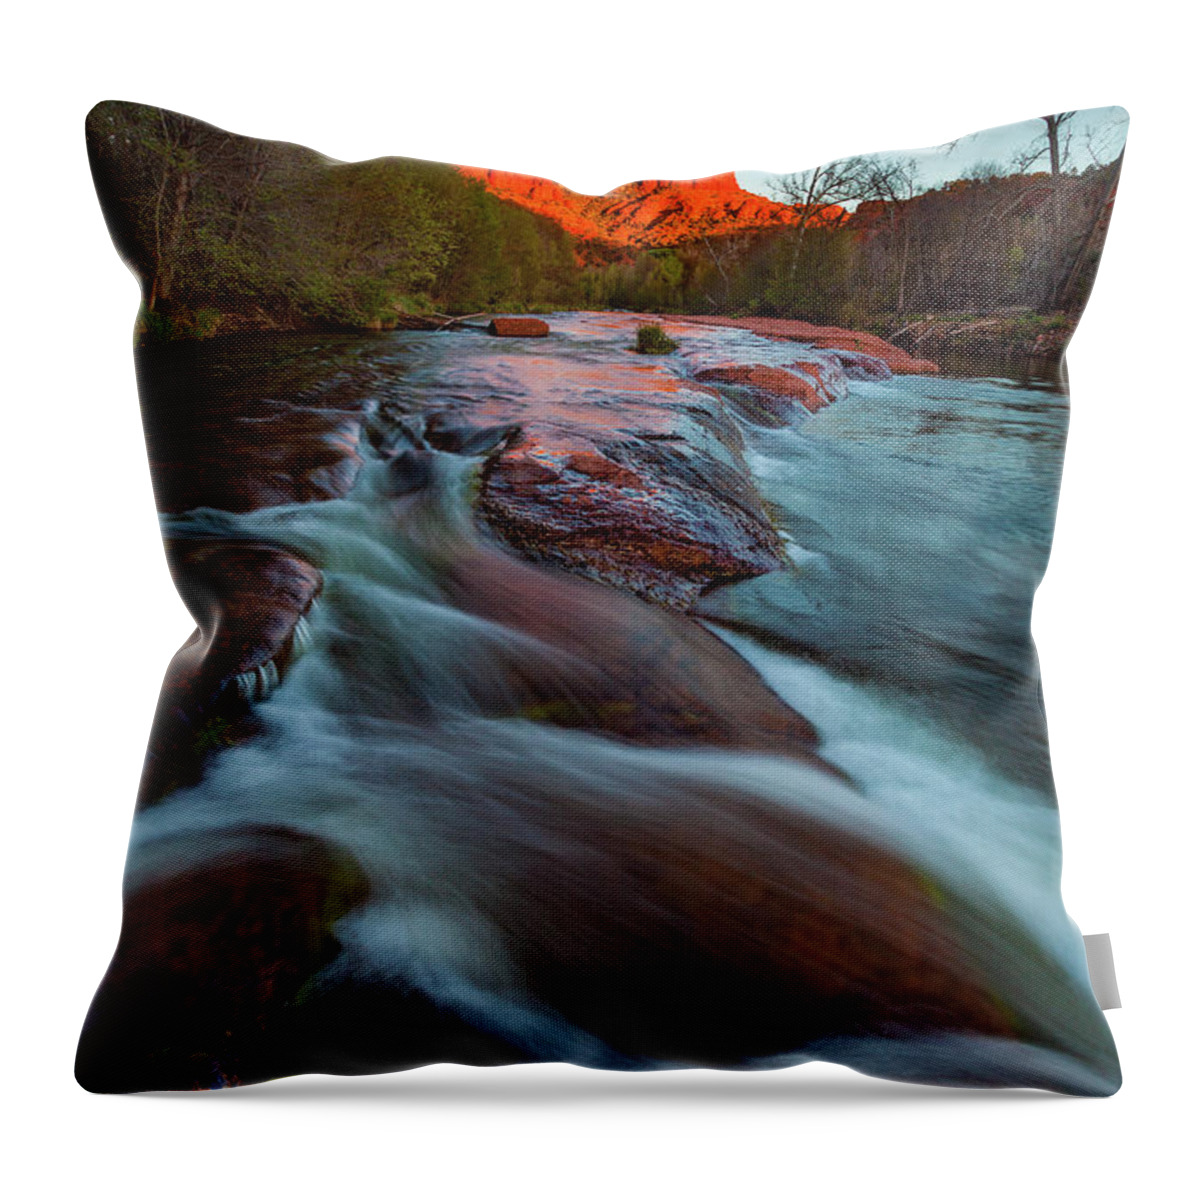 Sedona Throw Pillow featuring the photograph Red Rock Creek by Darren White